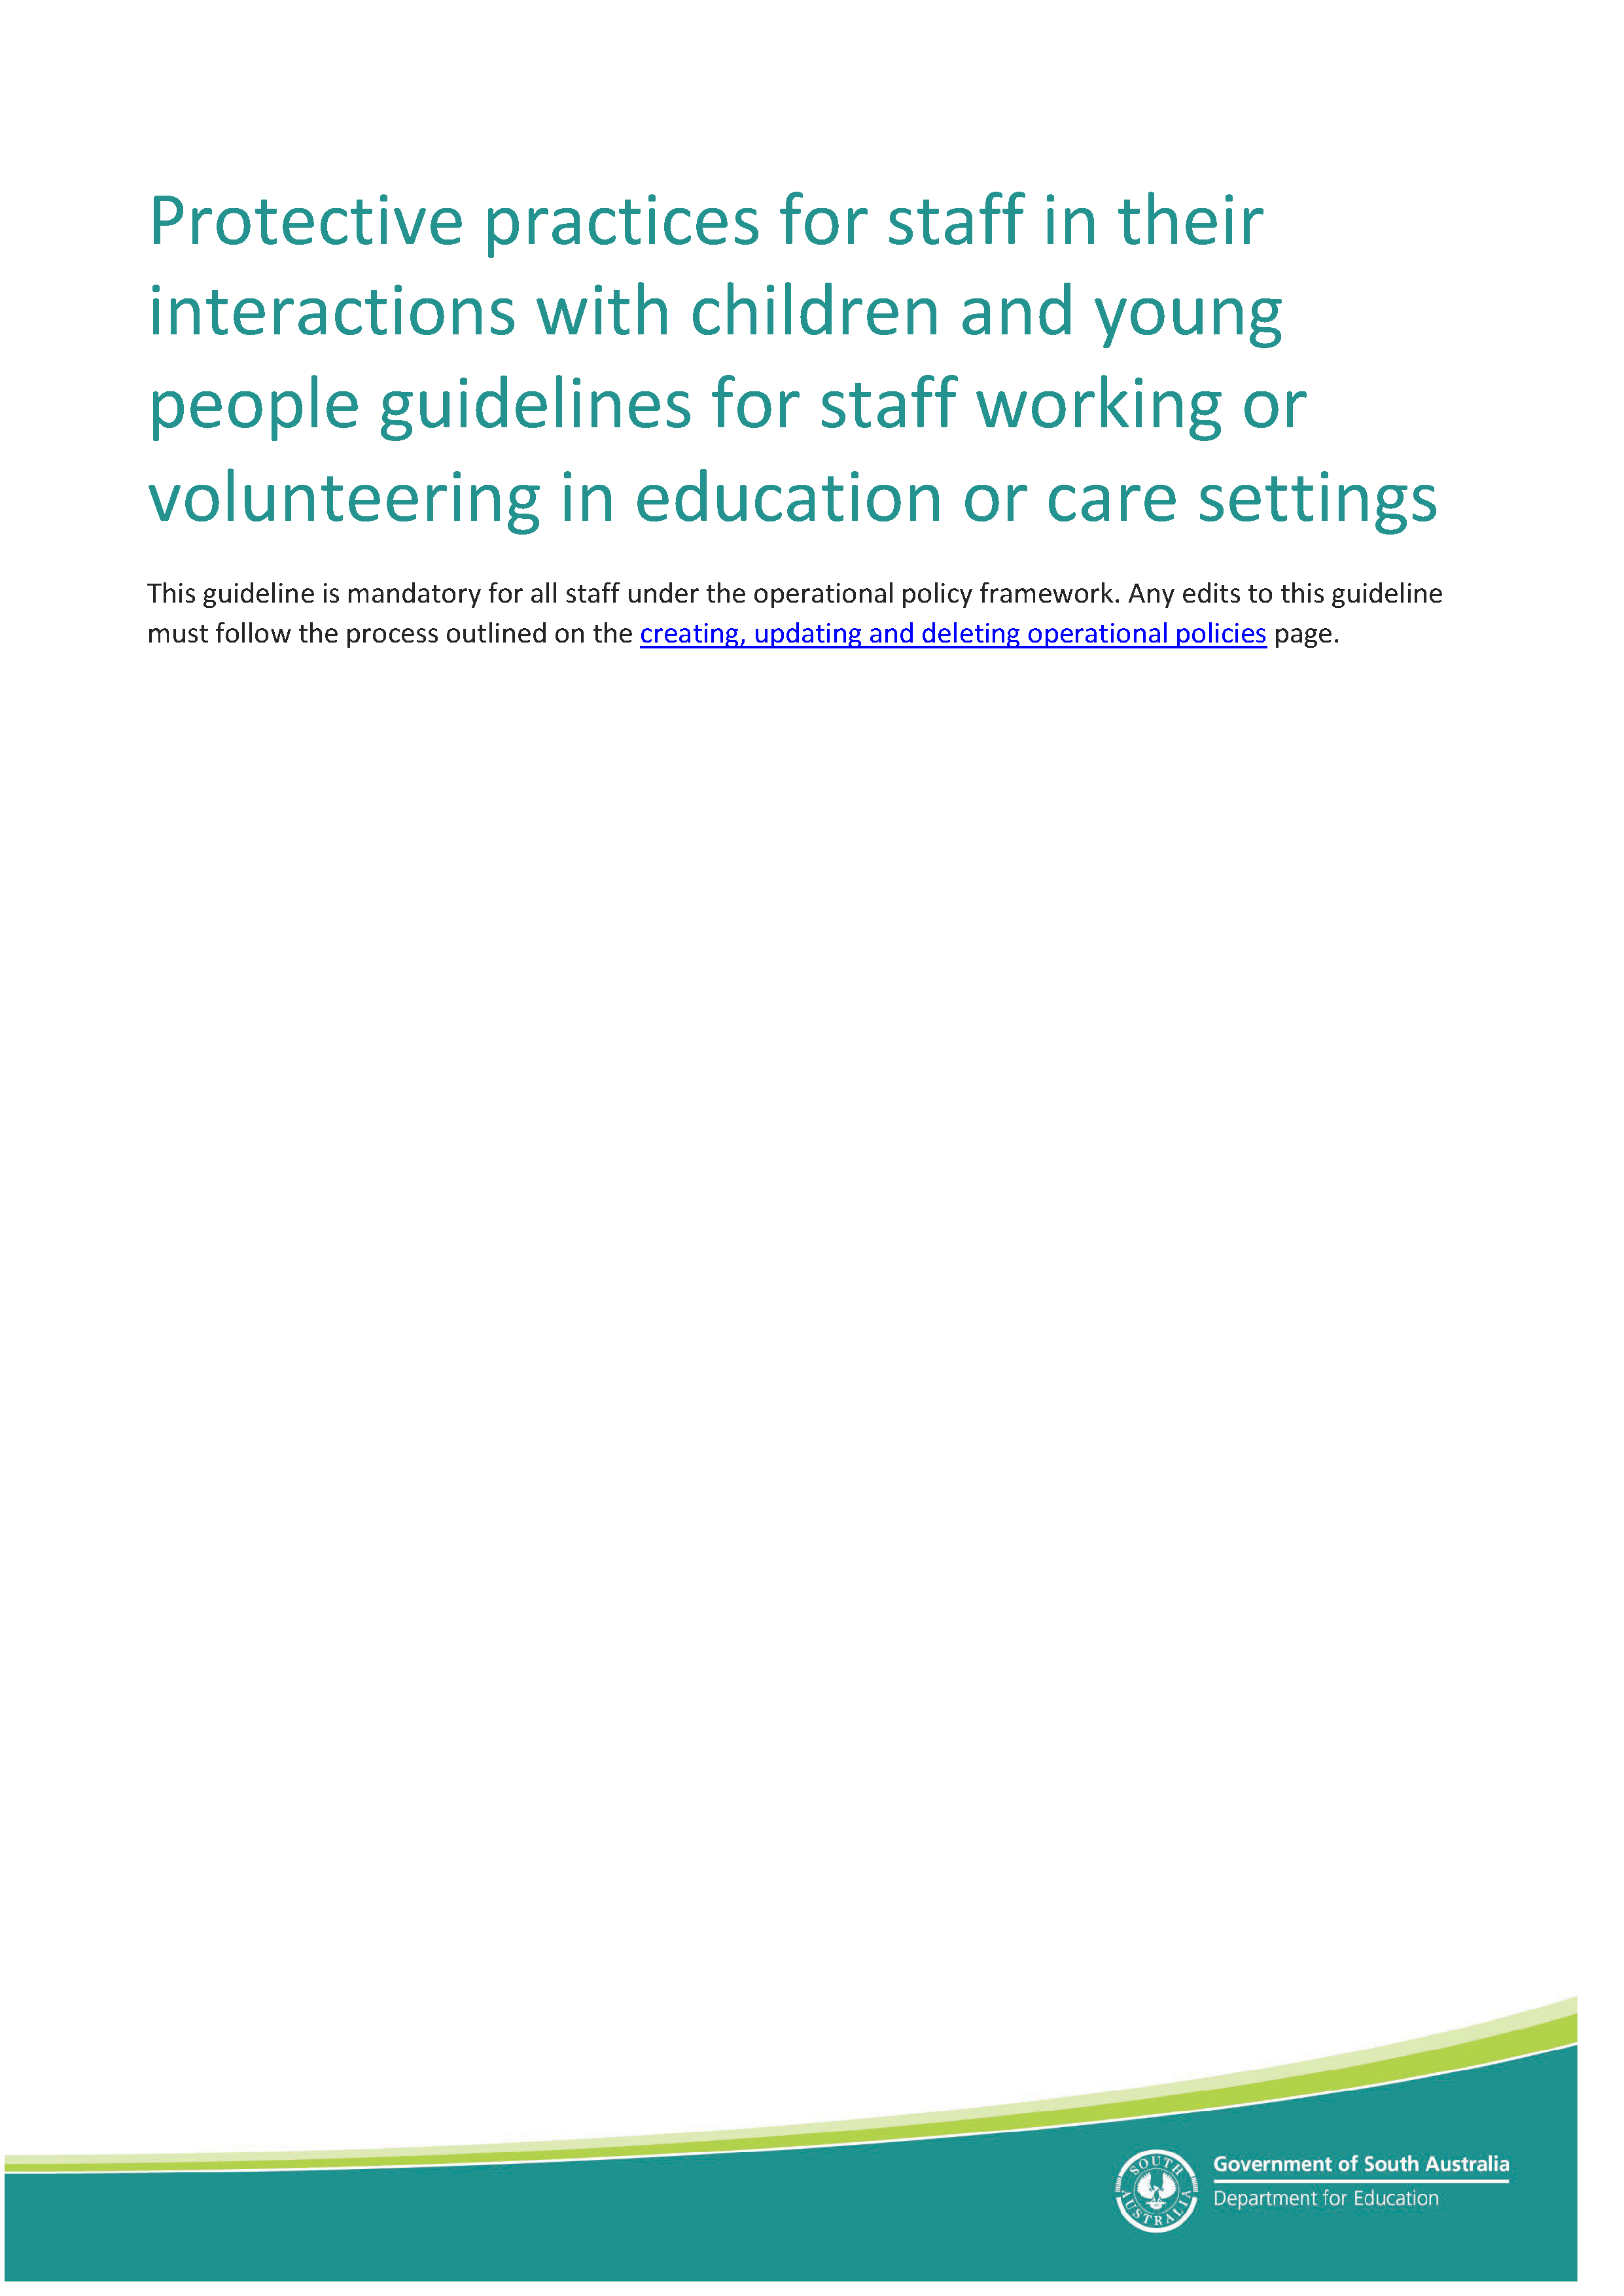 protective_practices_for_staff_in_their_interactions_with_children_and_young_people 2019_Page_01.png